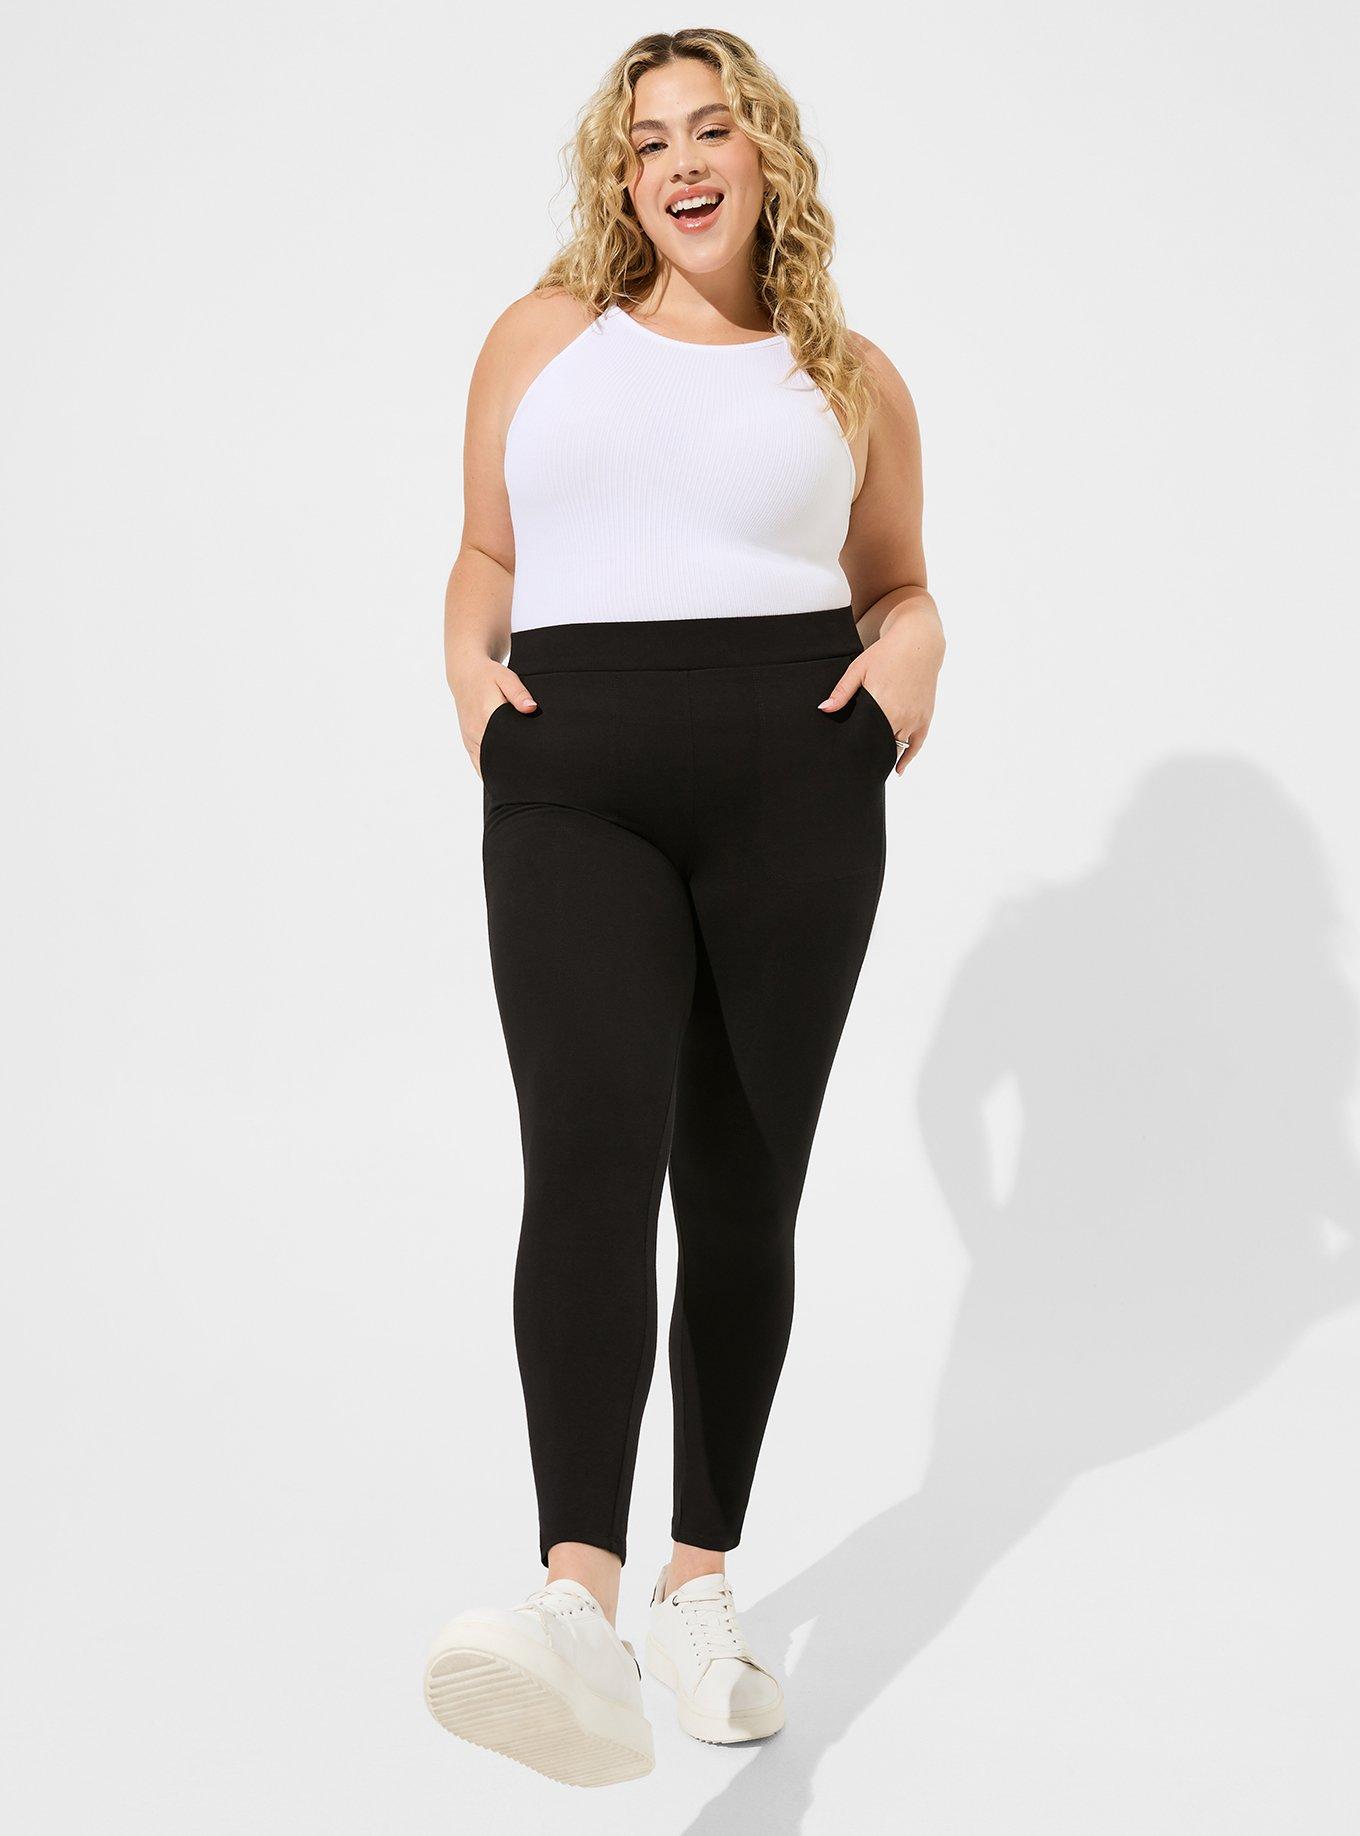 Cotton Leggings for Women Plus Size High Waisted Kuwait